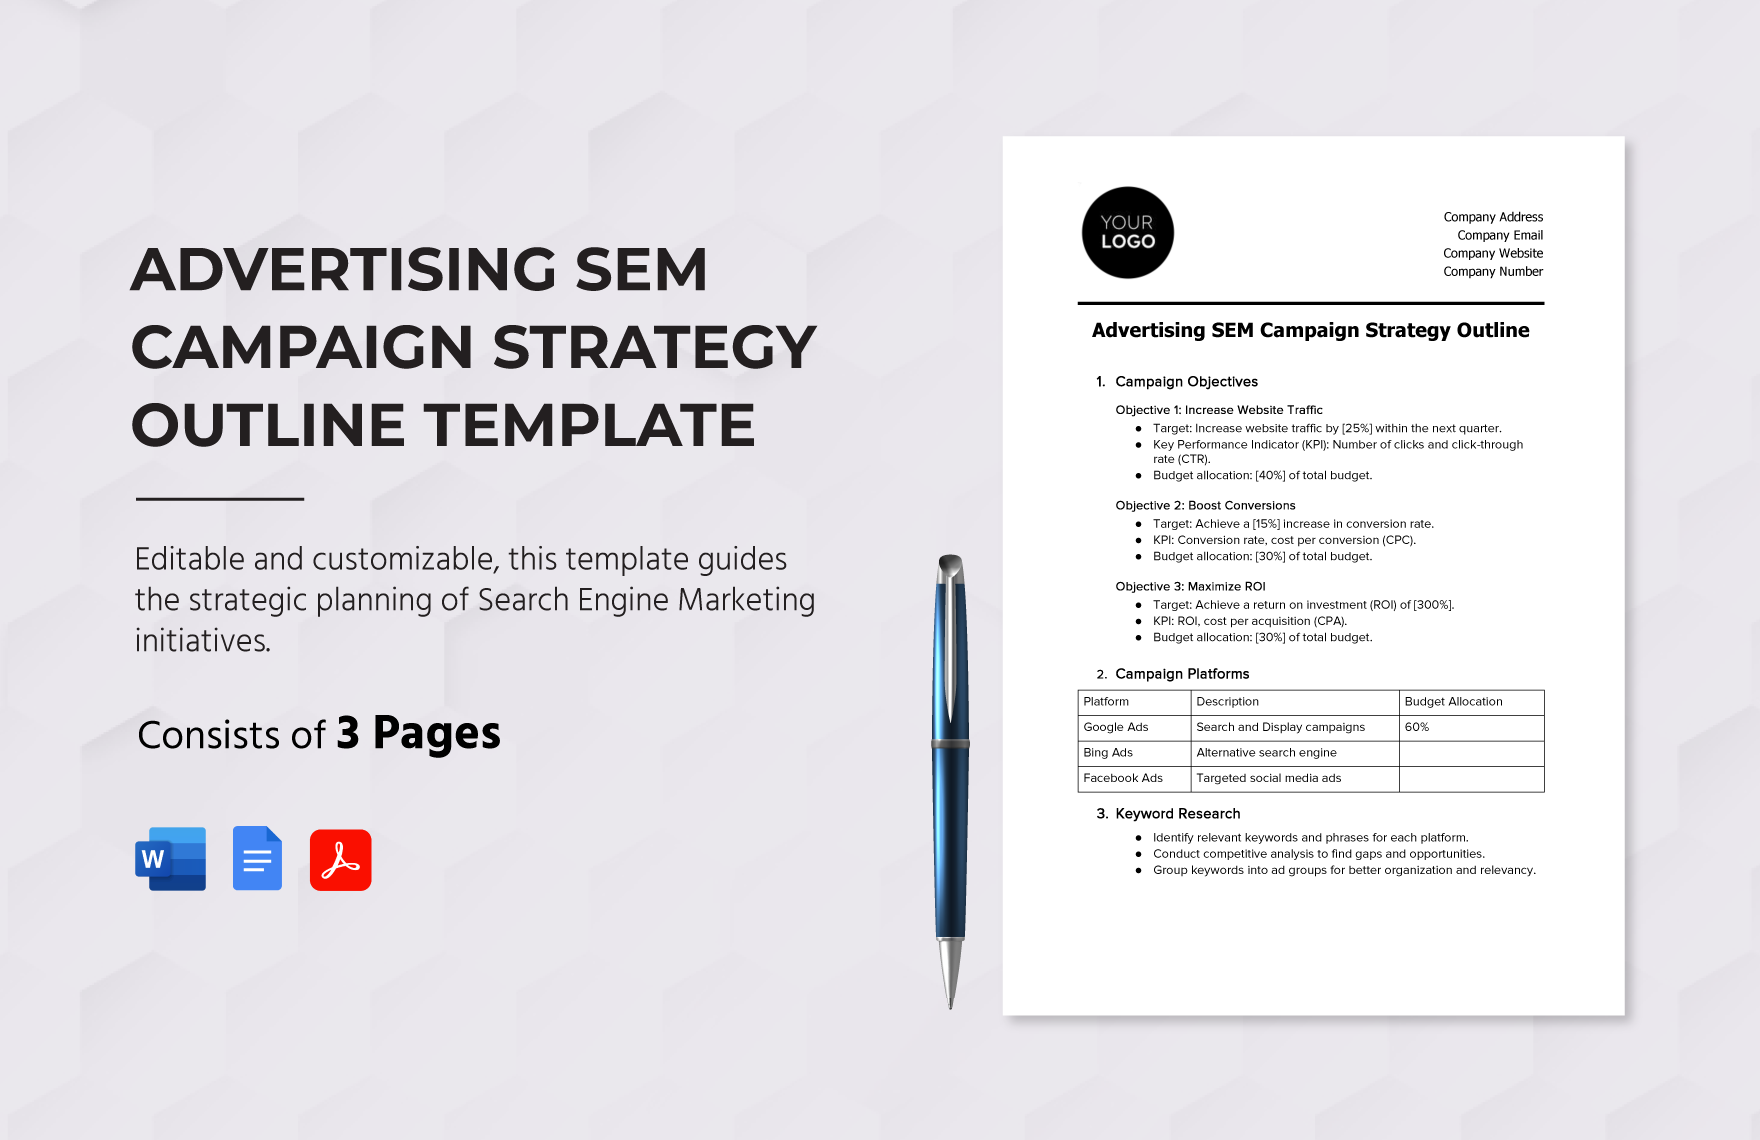 Advertising SEM Campaign Strategy Outline Template